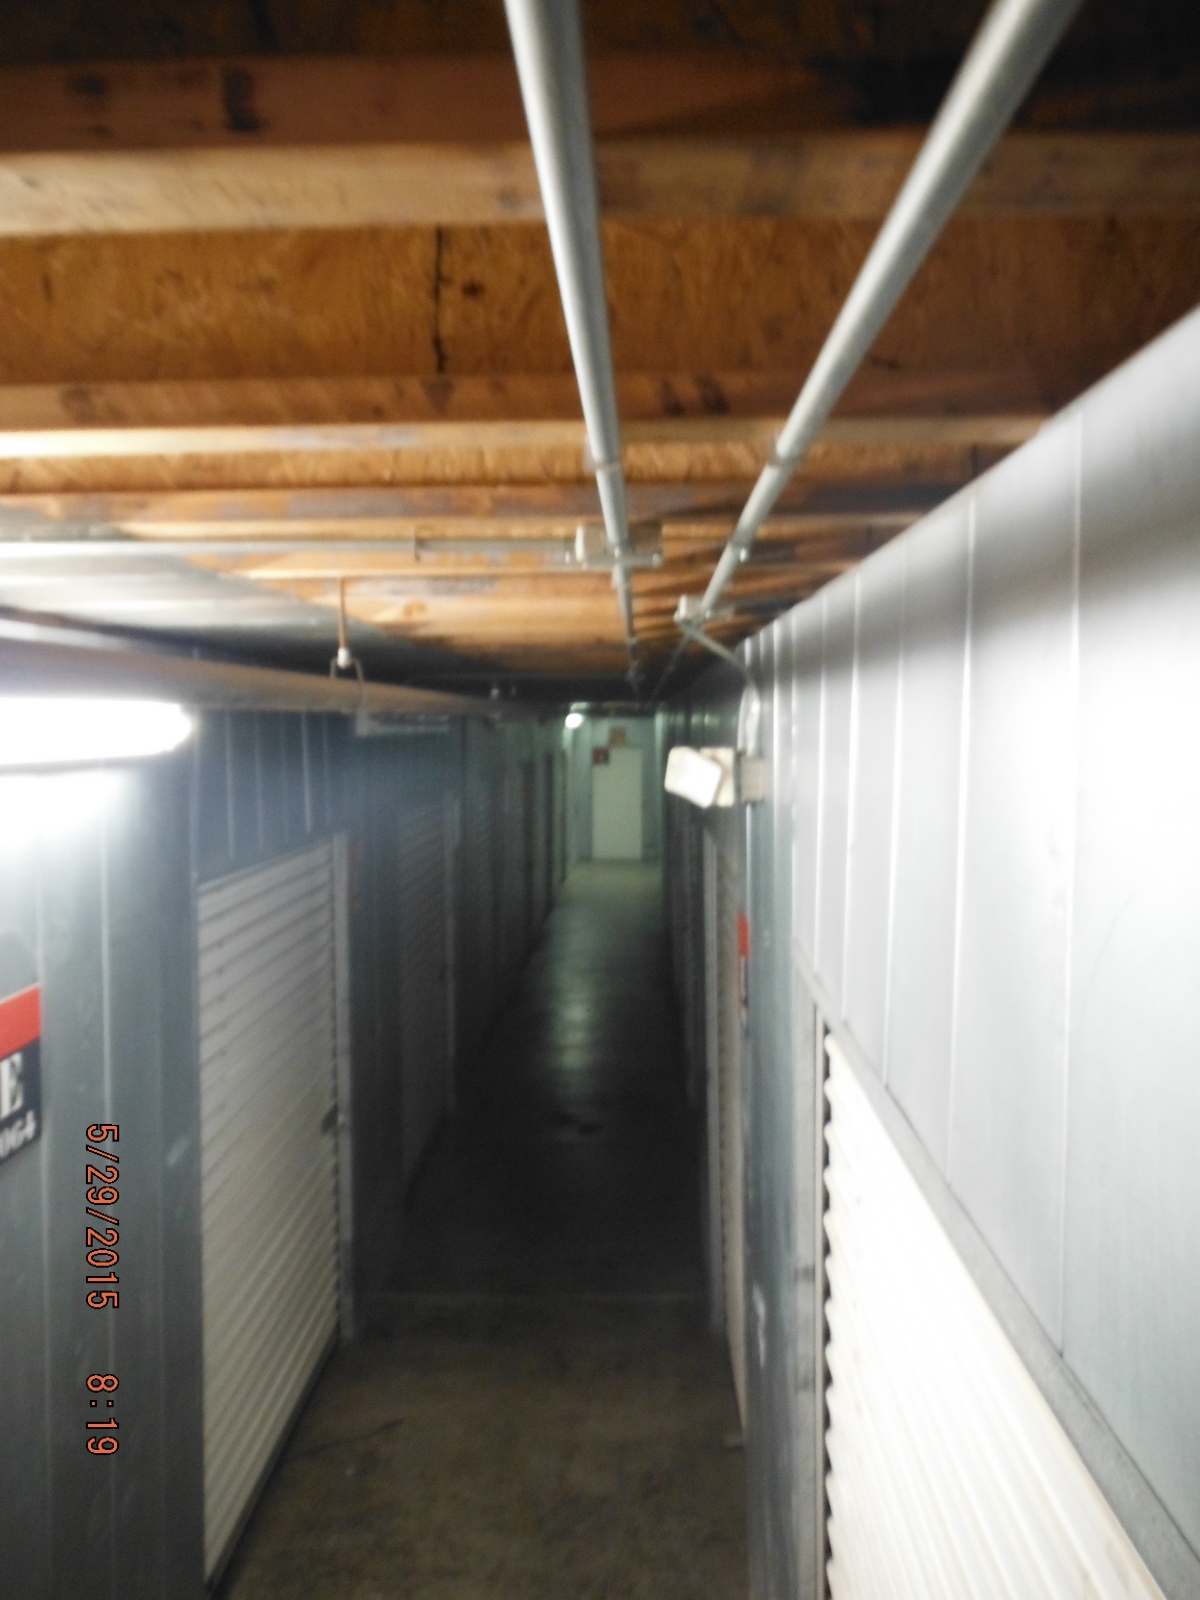 HOW THIEVES CAN ENTER/EXIT ANY LOCKED INSIDE STORAGE UNIT - see the photo(s)